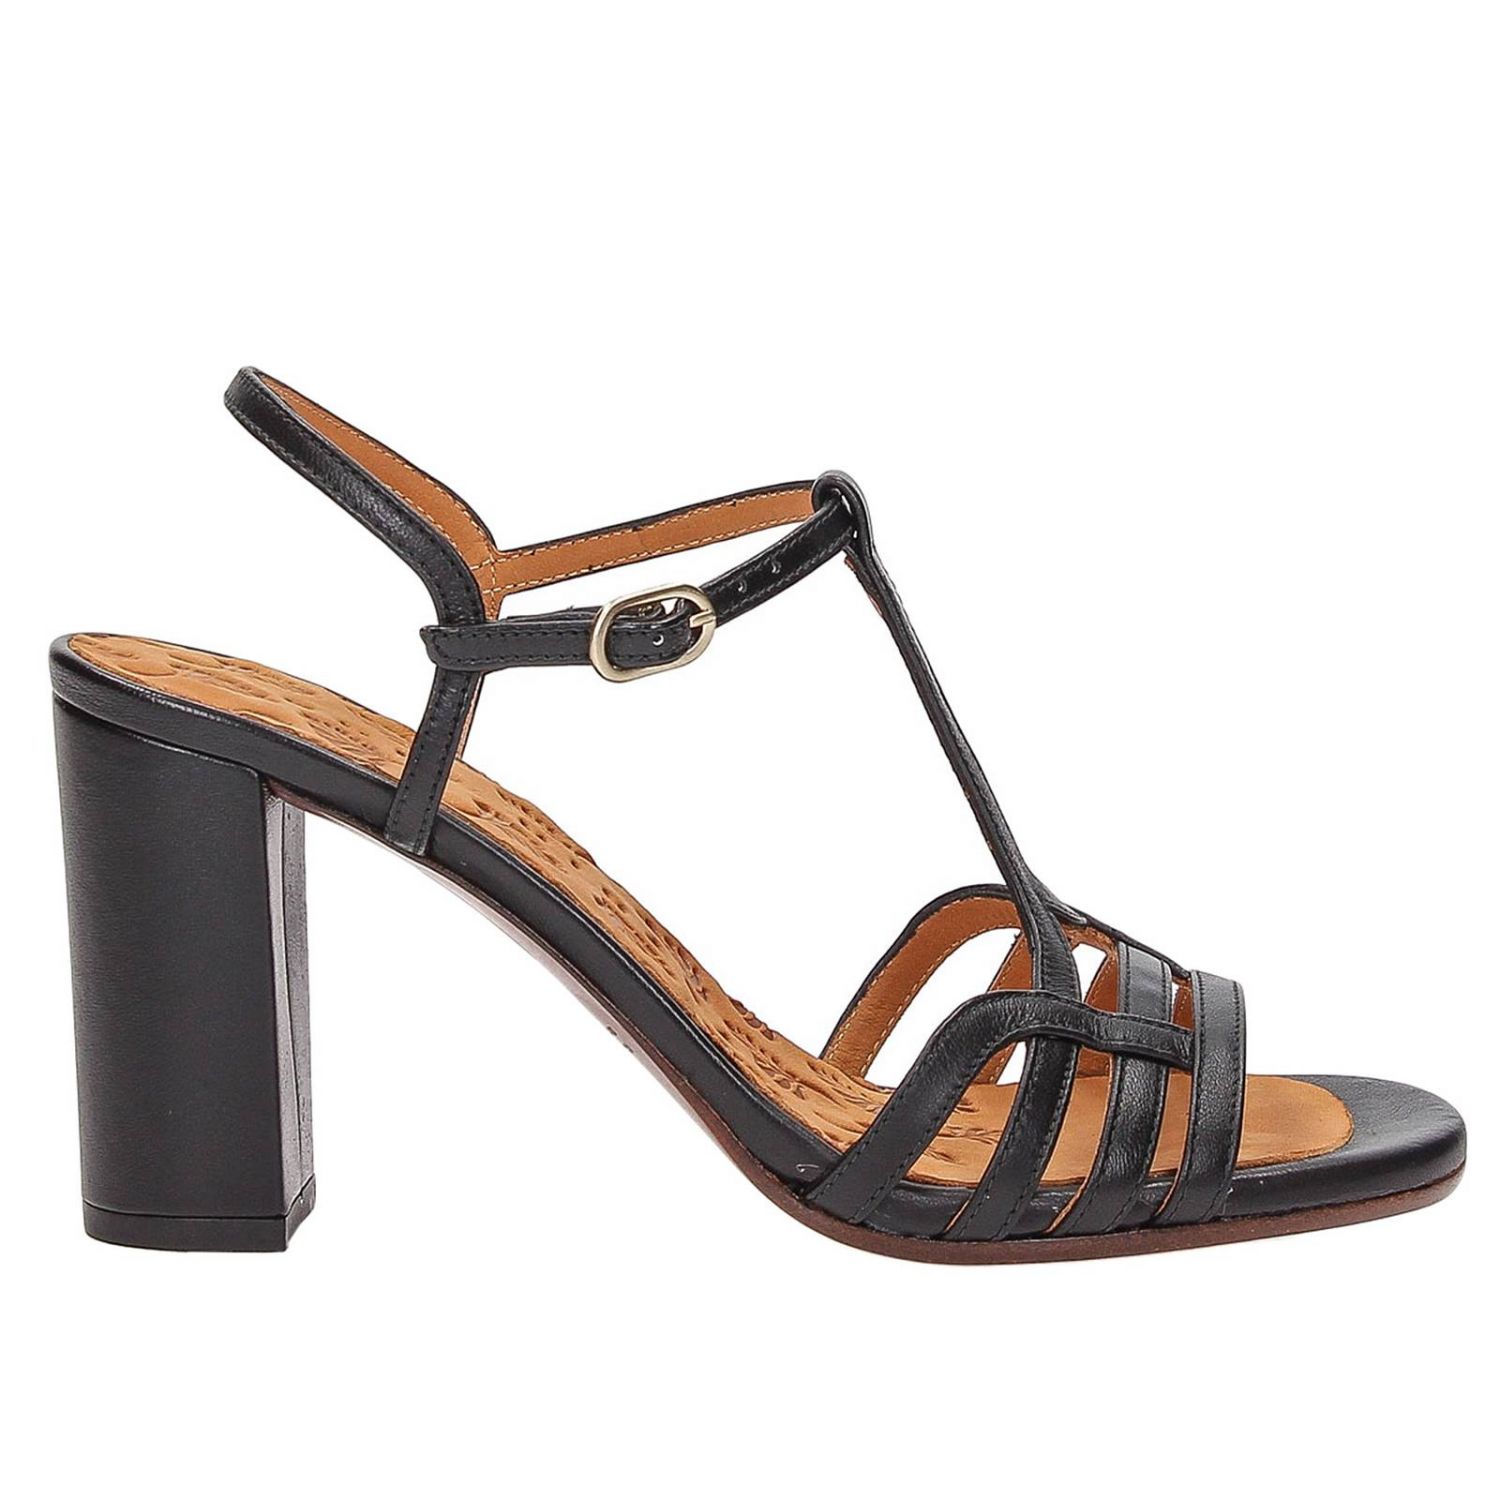 Chie Mihara Outlet: Shoes women - Black | Heeled Sandals Chie Mihara ...